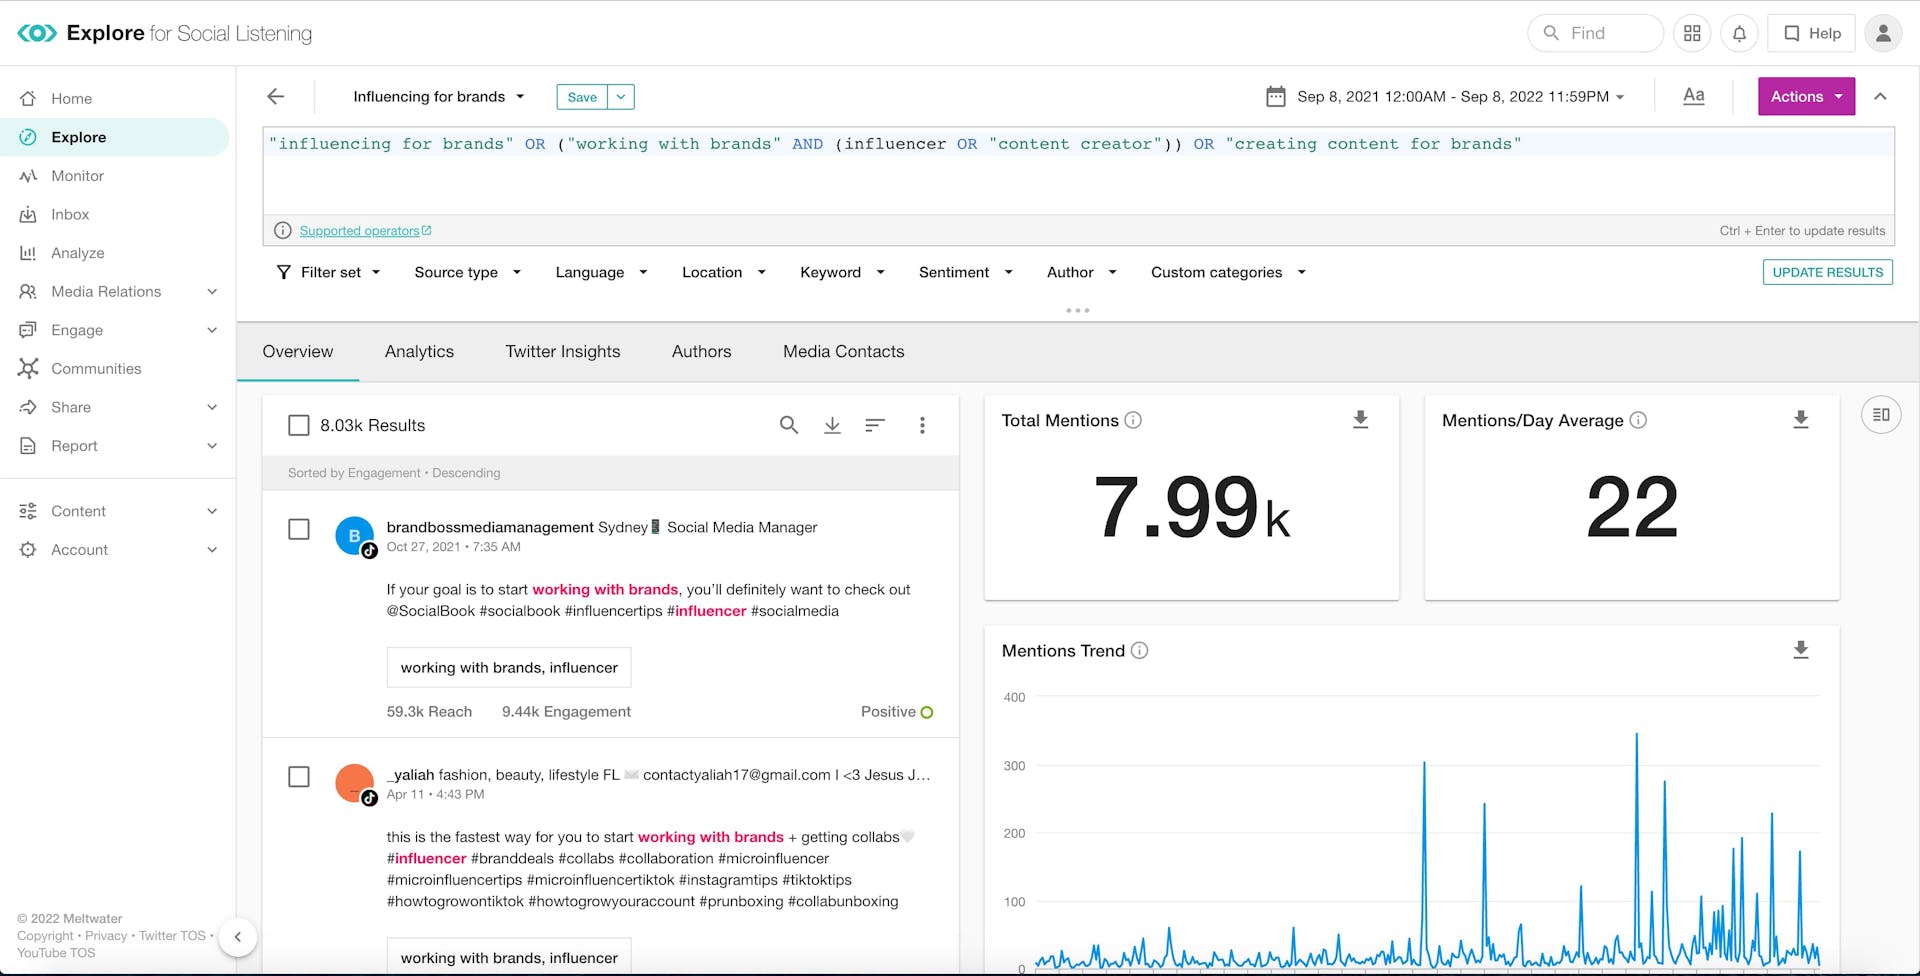 Meltwater's Explore social listening platform dashboard for a query about influencing for brands.